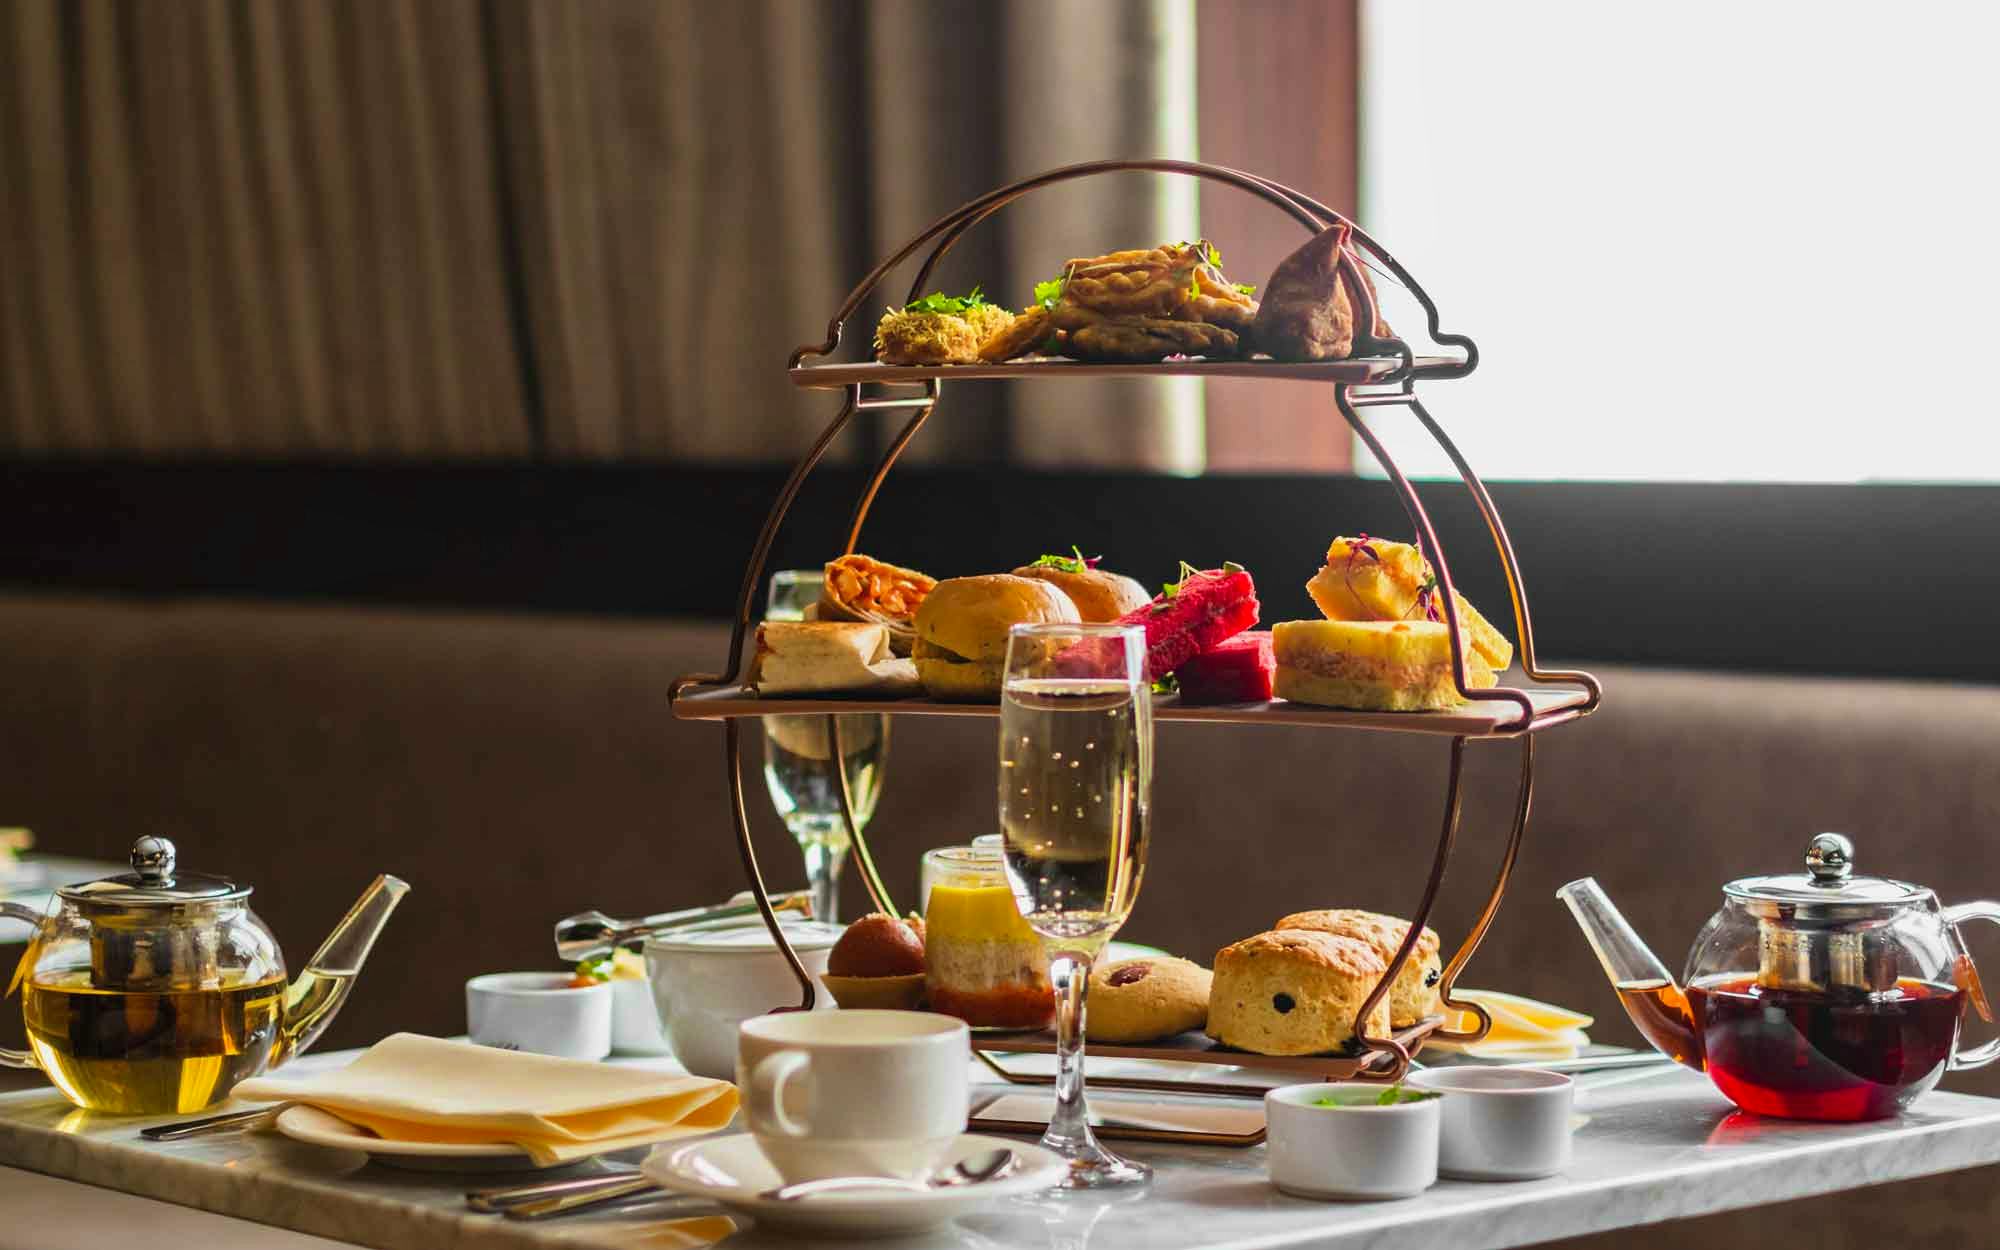 The Chilworth Hotel Indian afternoon tea